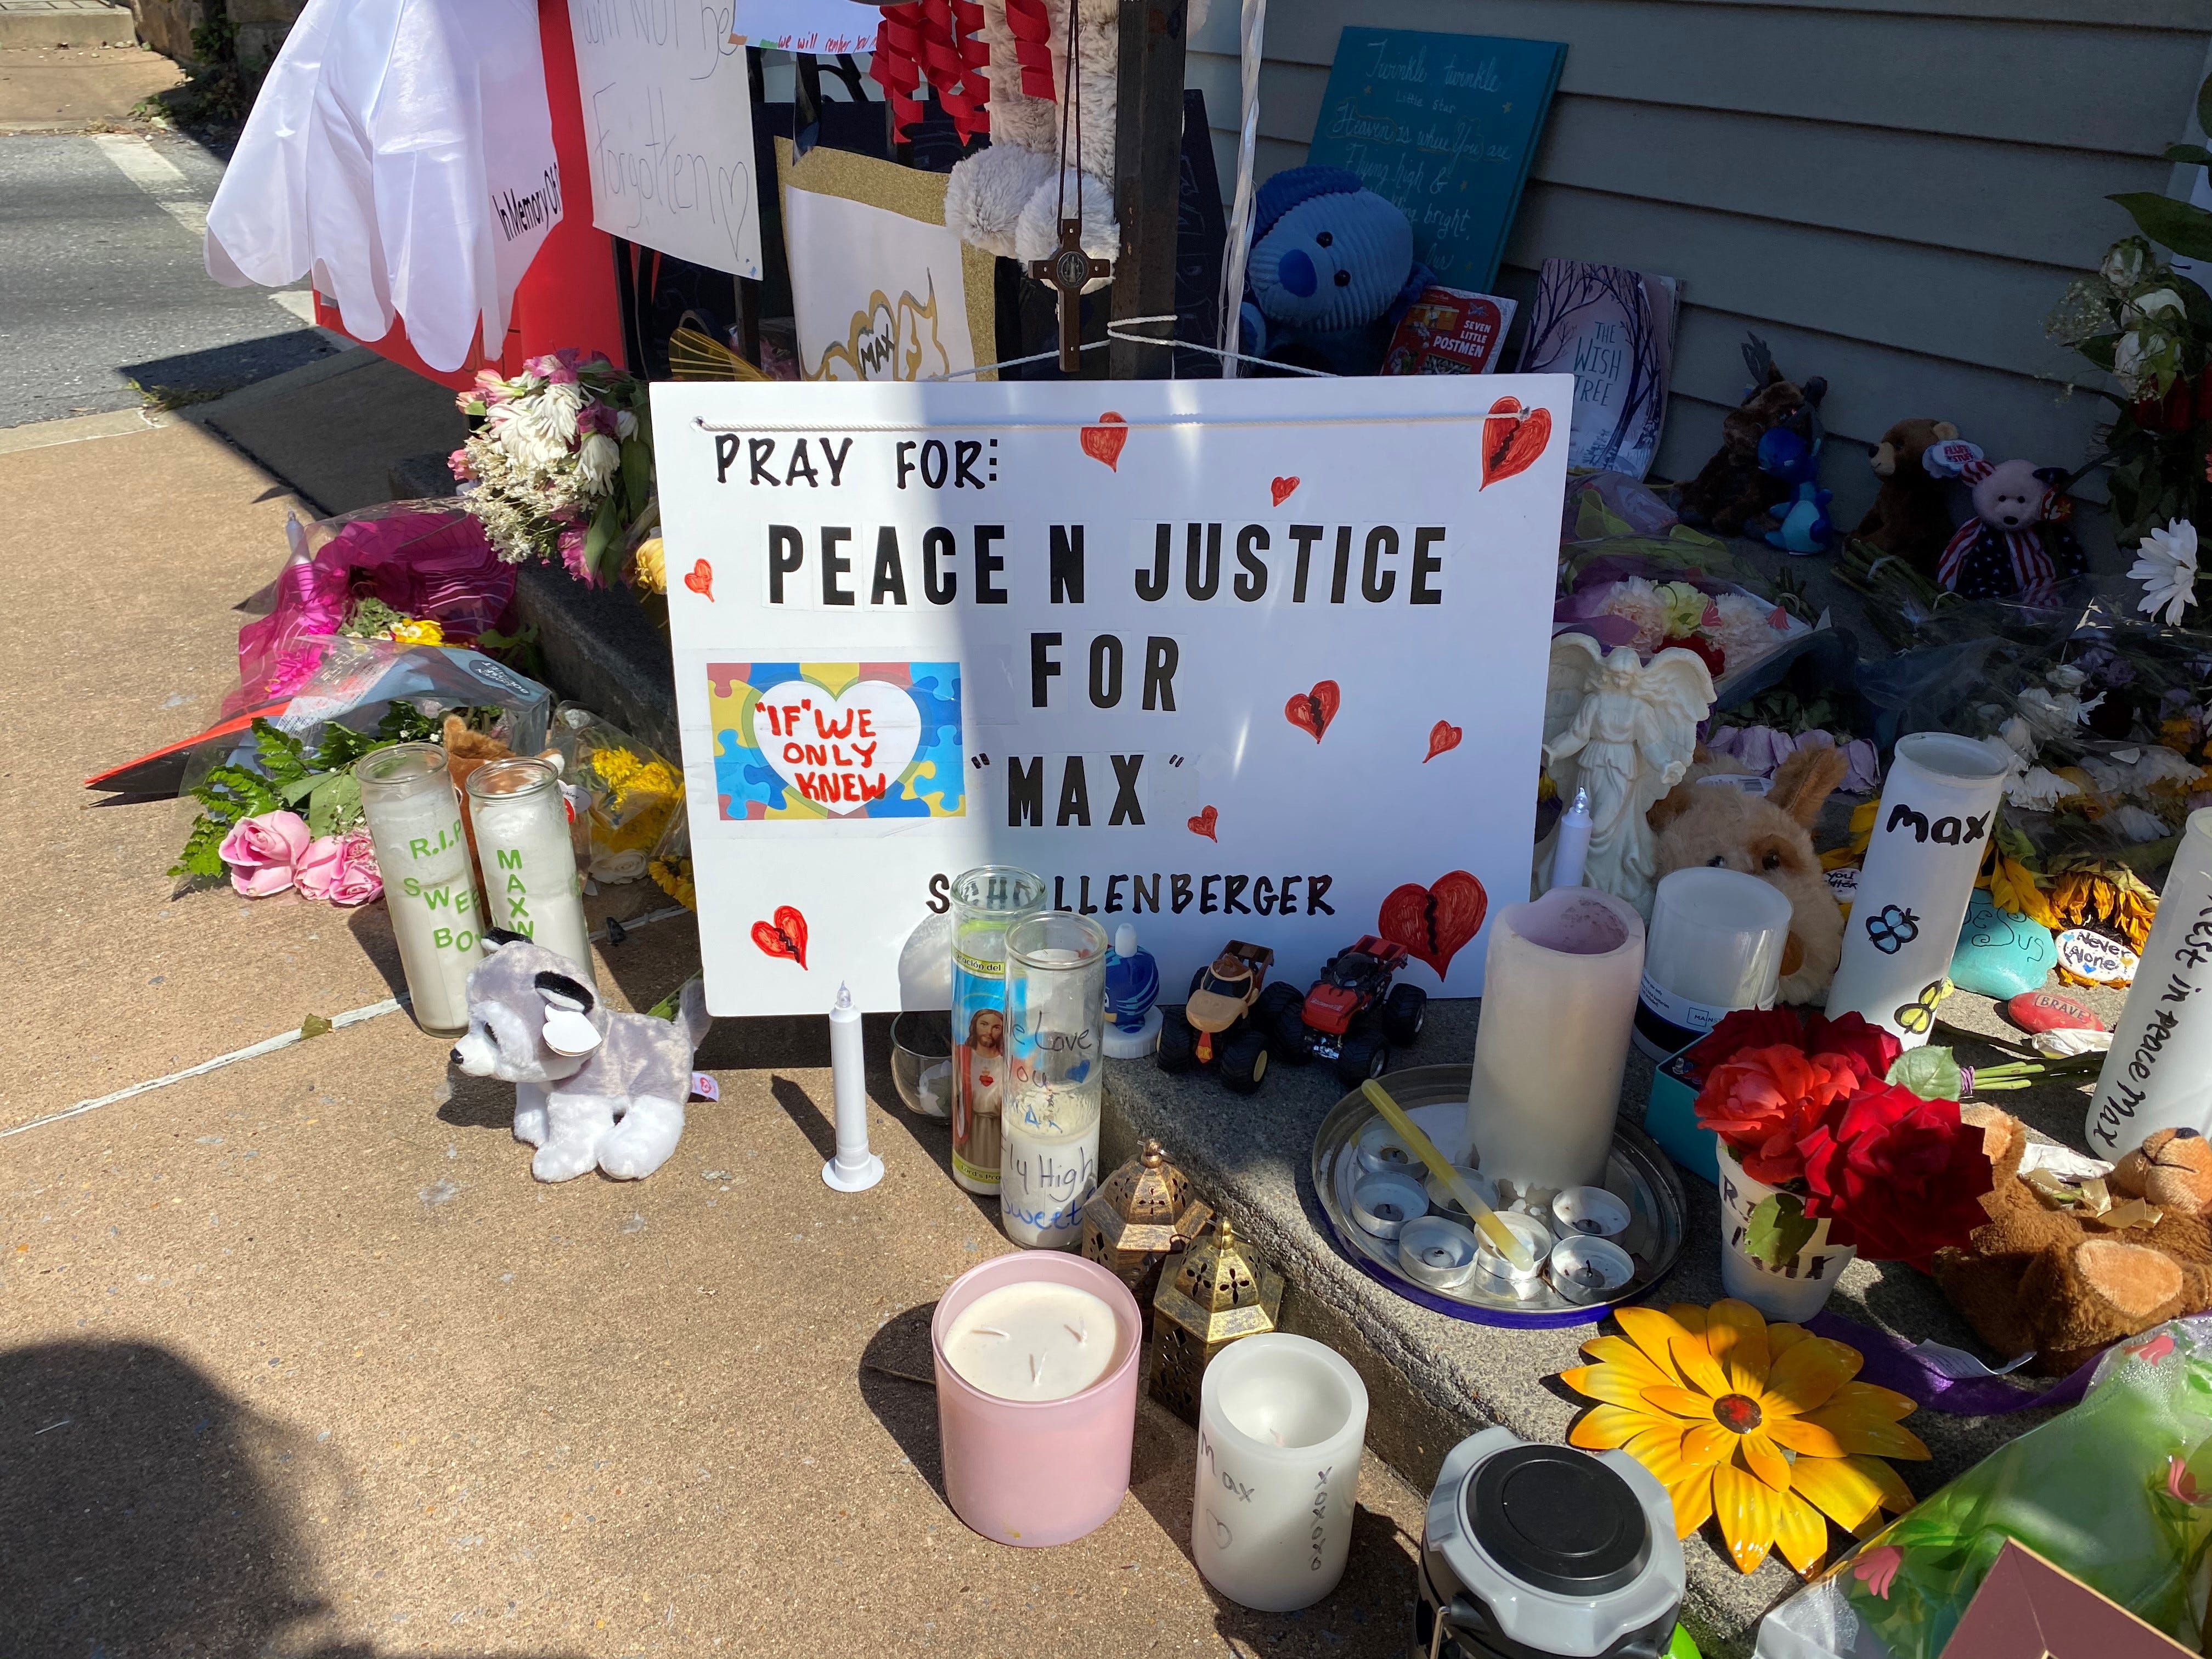 In 2020 candles, flowers, signs, balloons and teddy bears fill the front porch of Maxwell Schollenberger's home, including this one: Peace N Justice for Max.